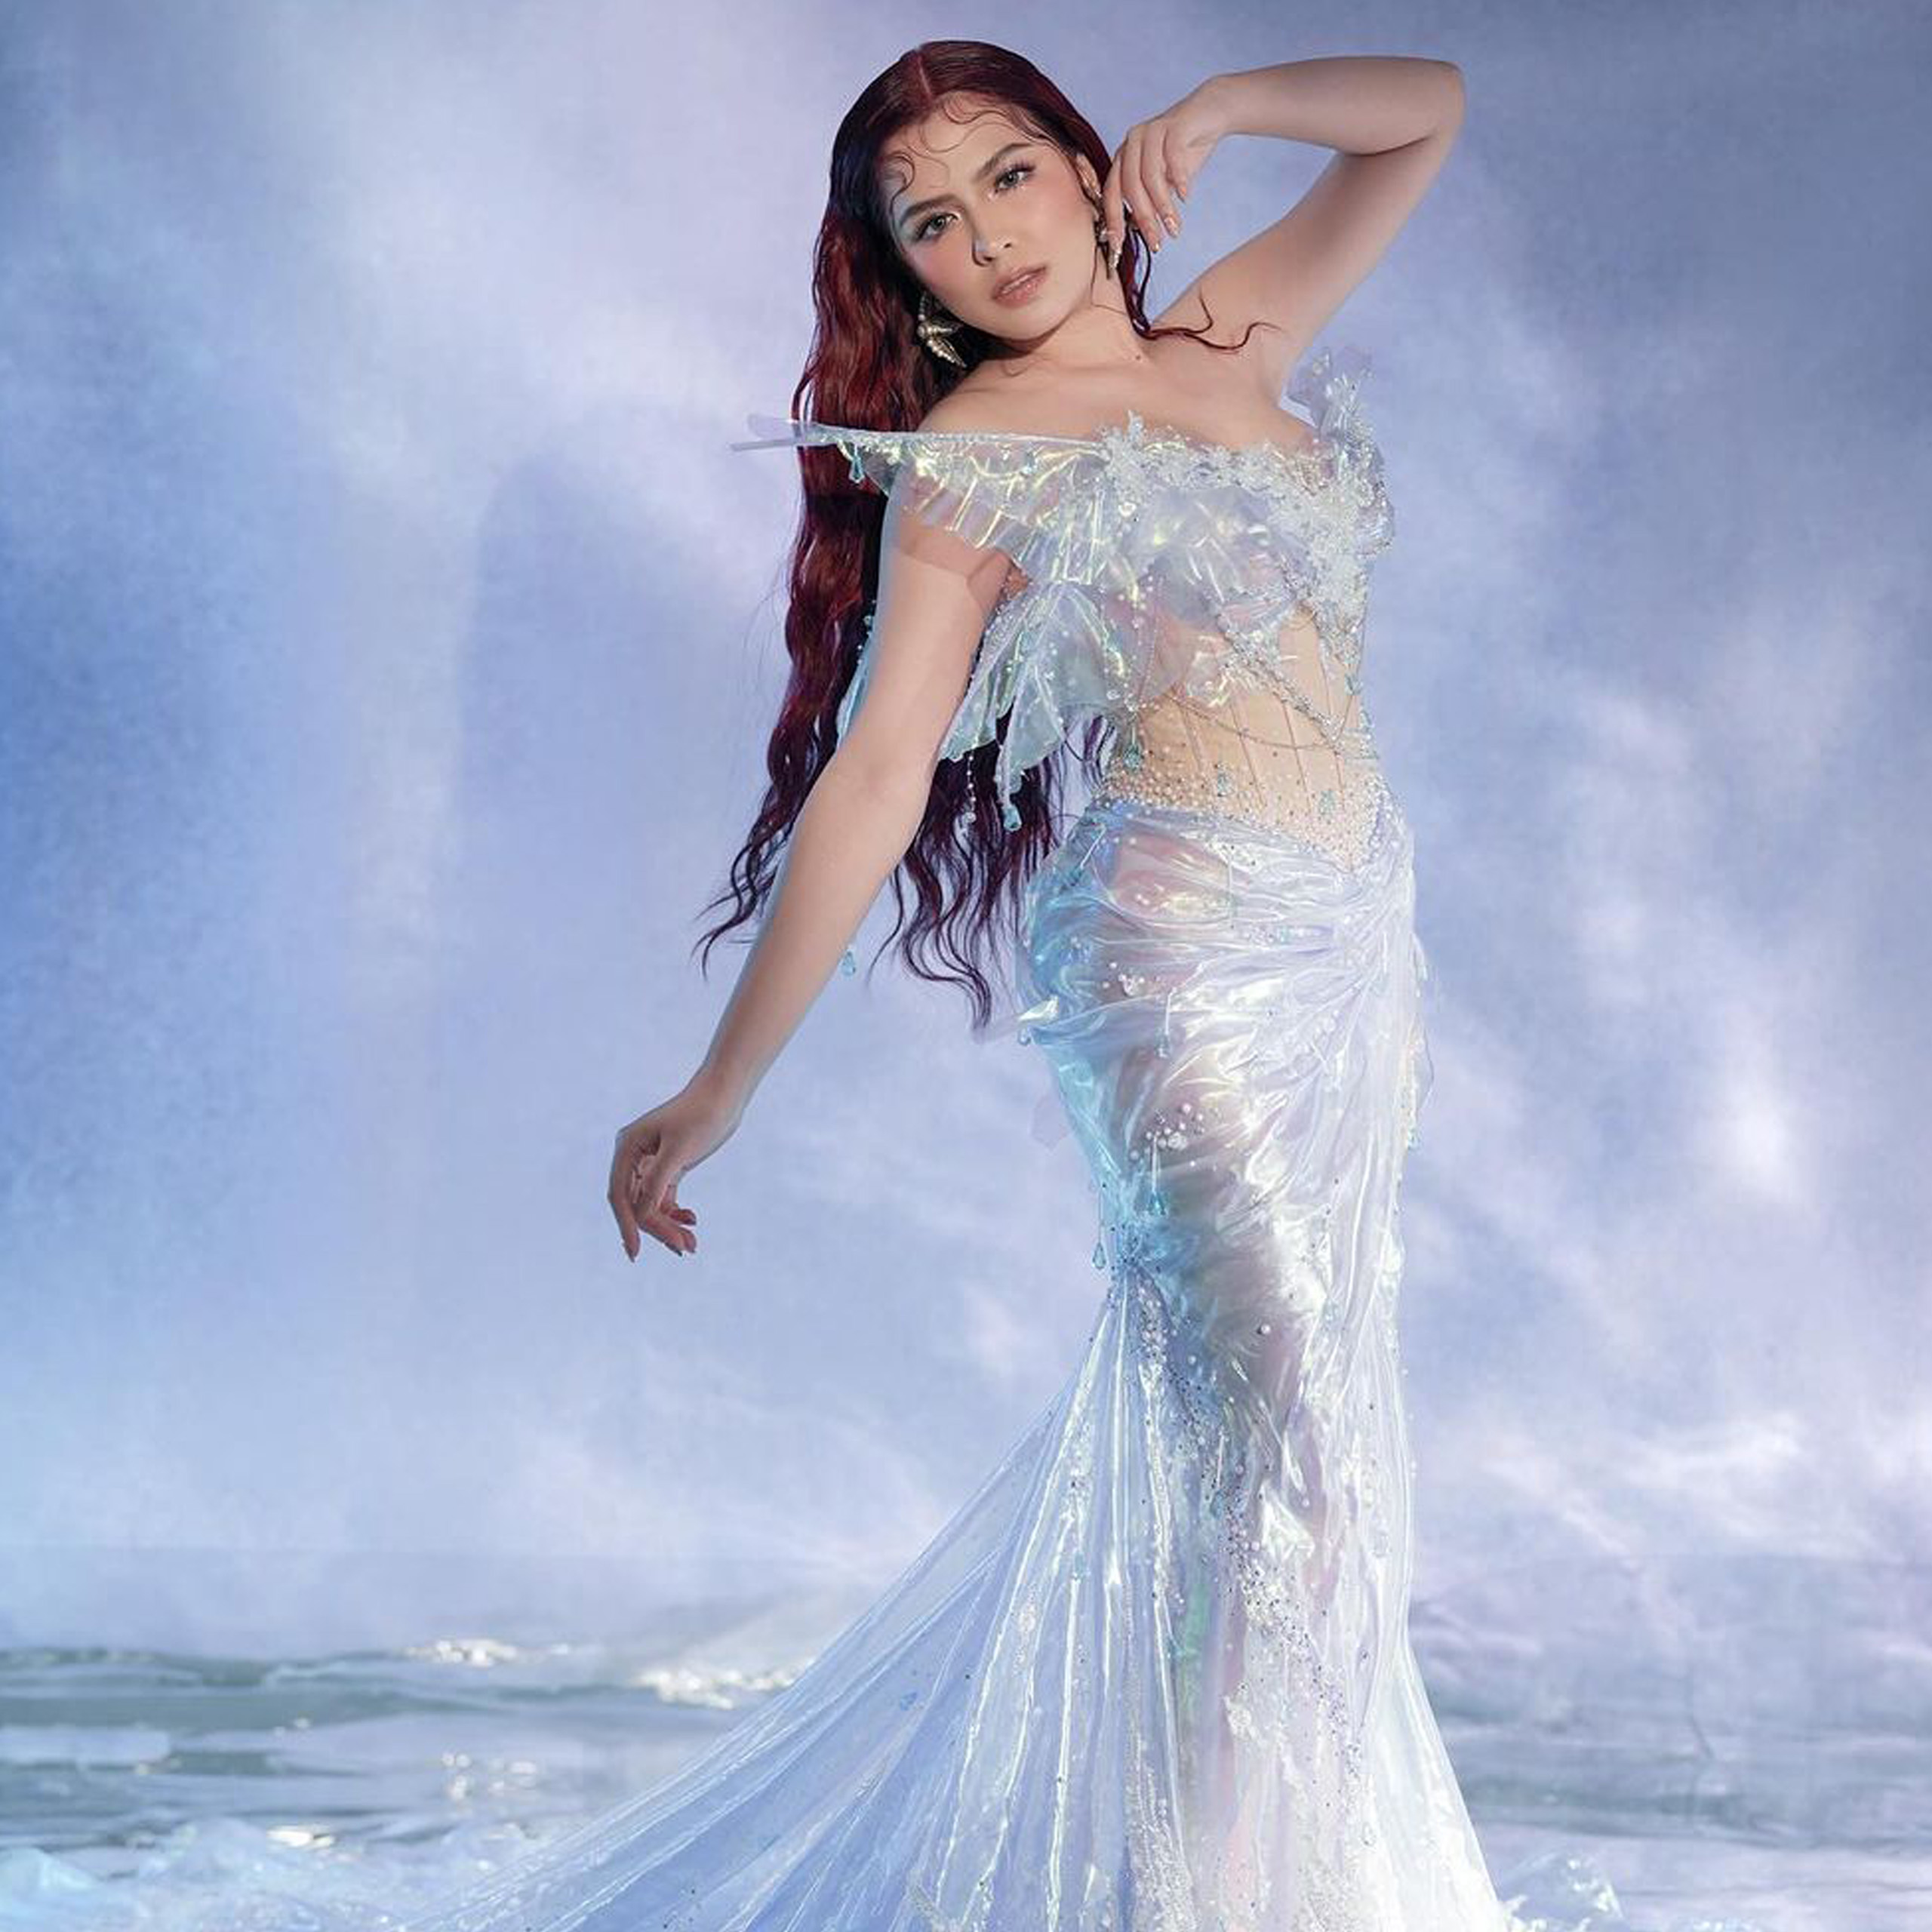 Behind Alexa Ilacad’s Ariel-Inspired Look at the Star Magical Prom